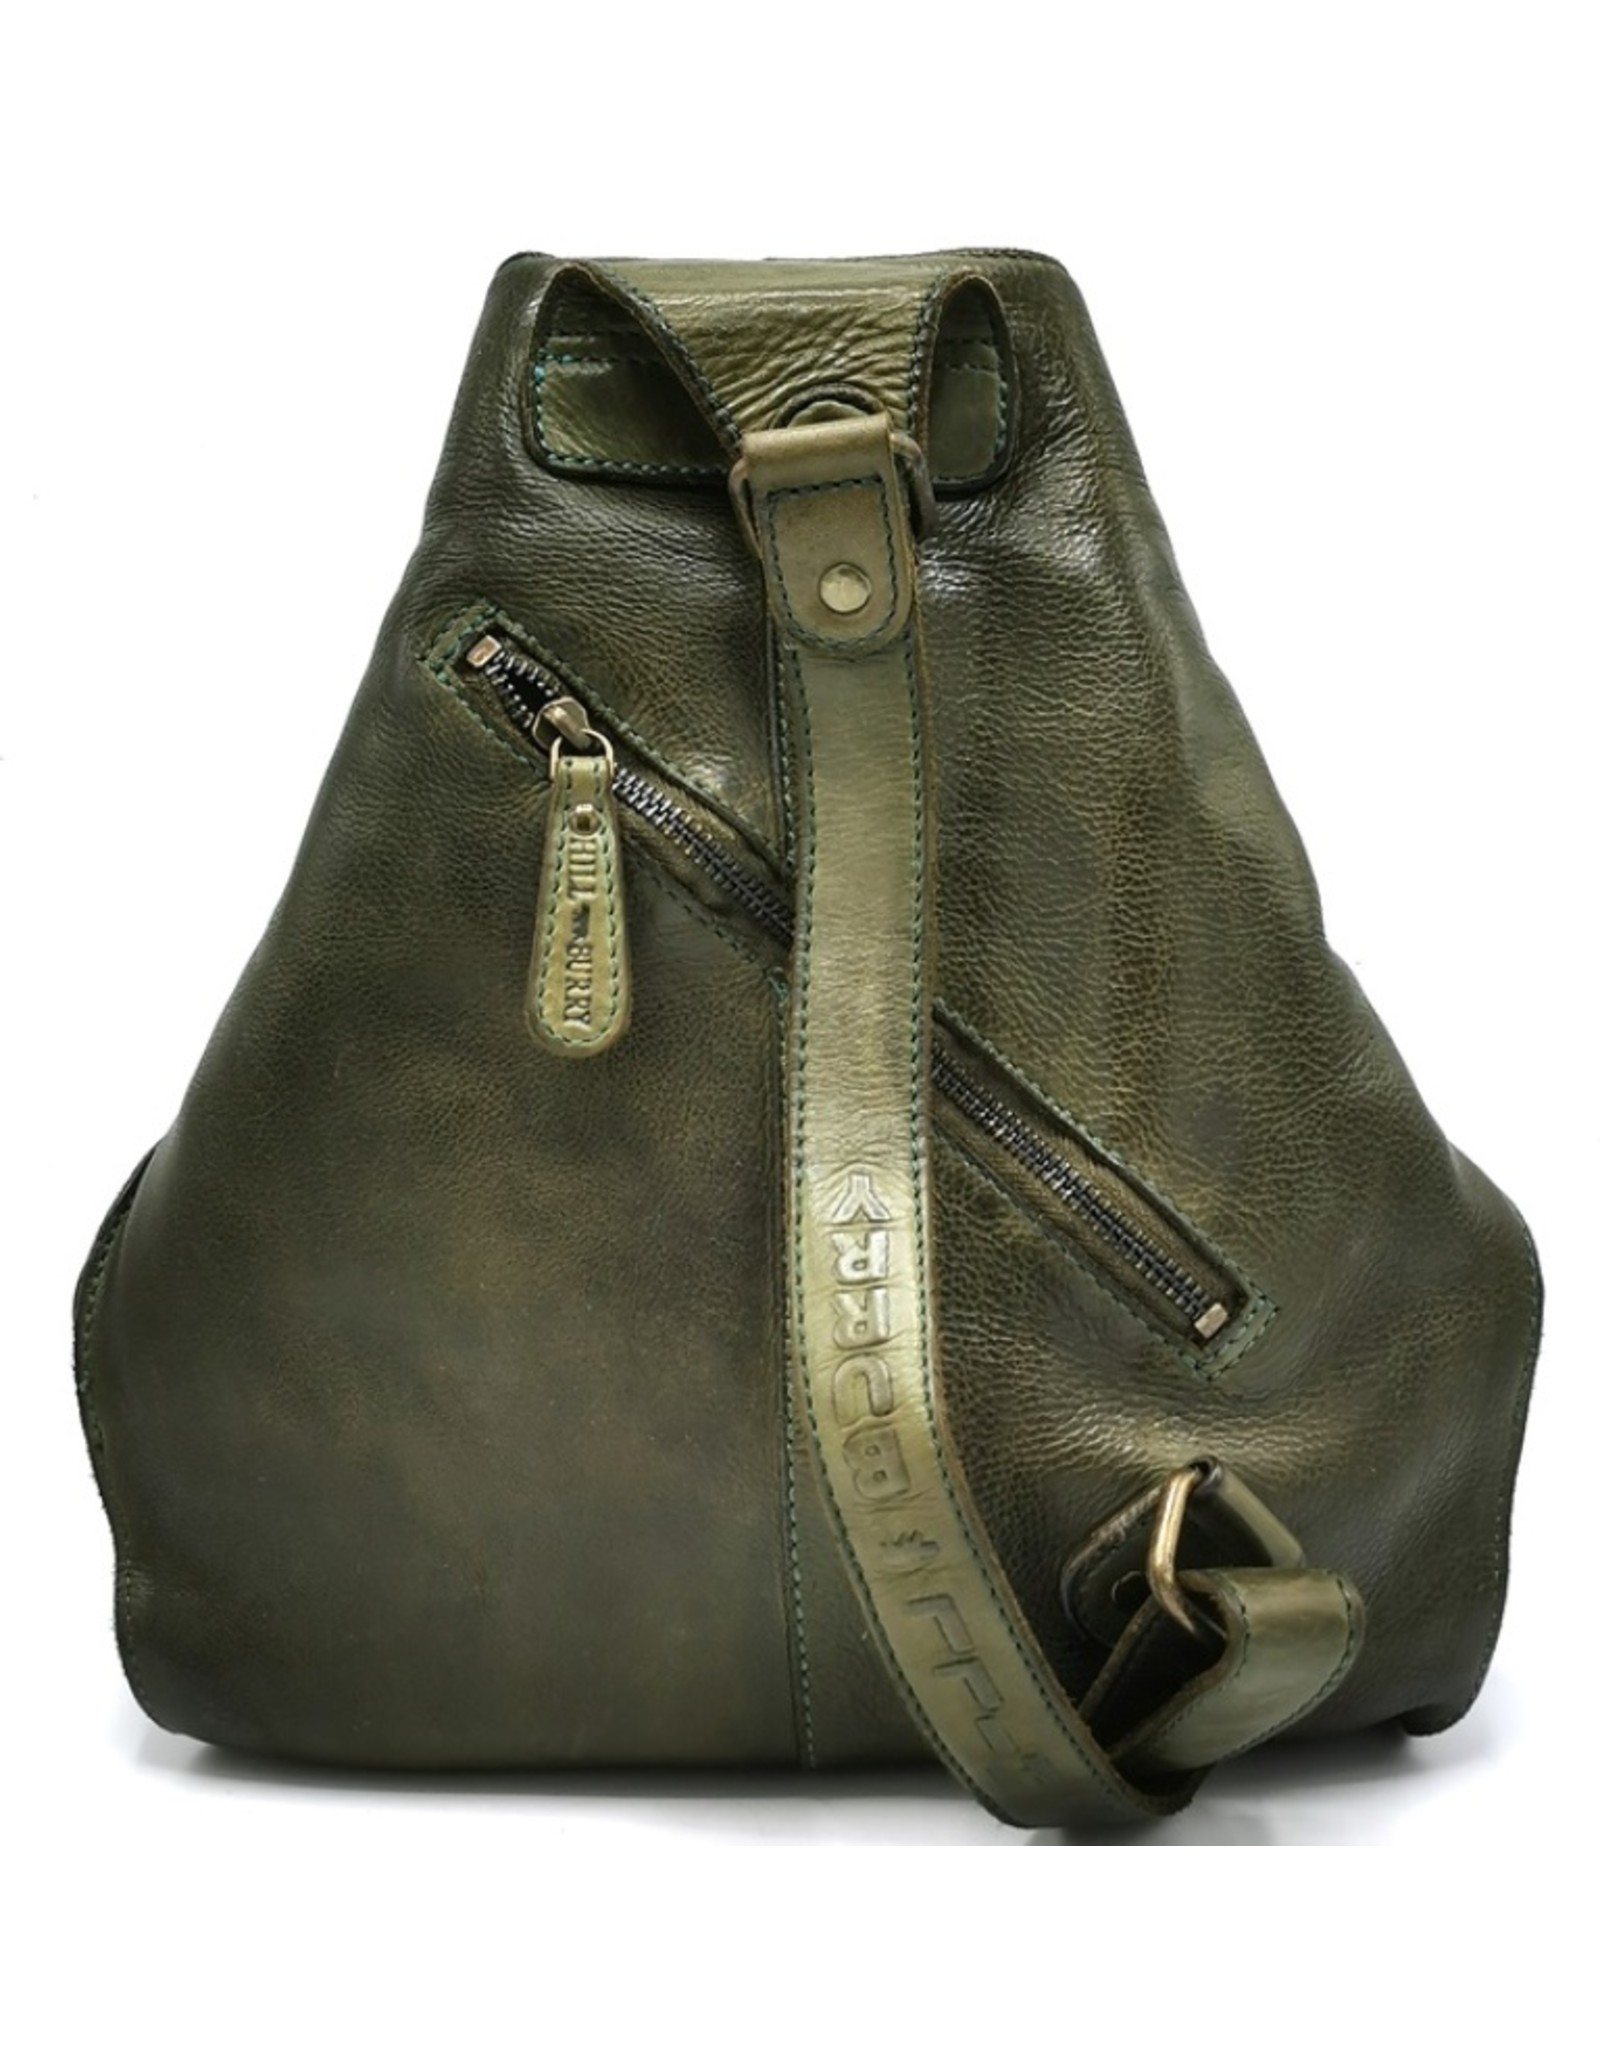 HillBurry Leather backpacks Leather shoppers - HillBurry Crossbody-Sling bag Washed Leather olive green